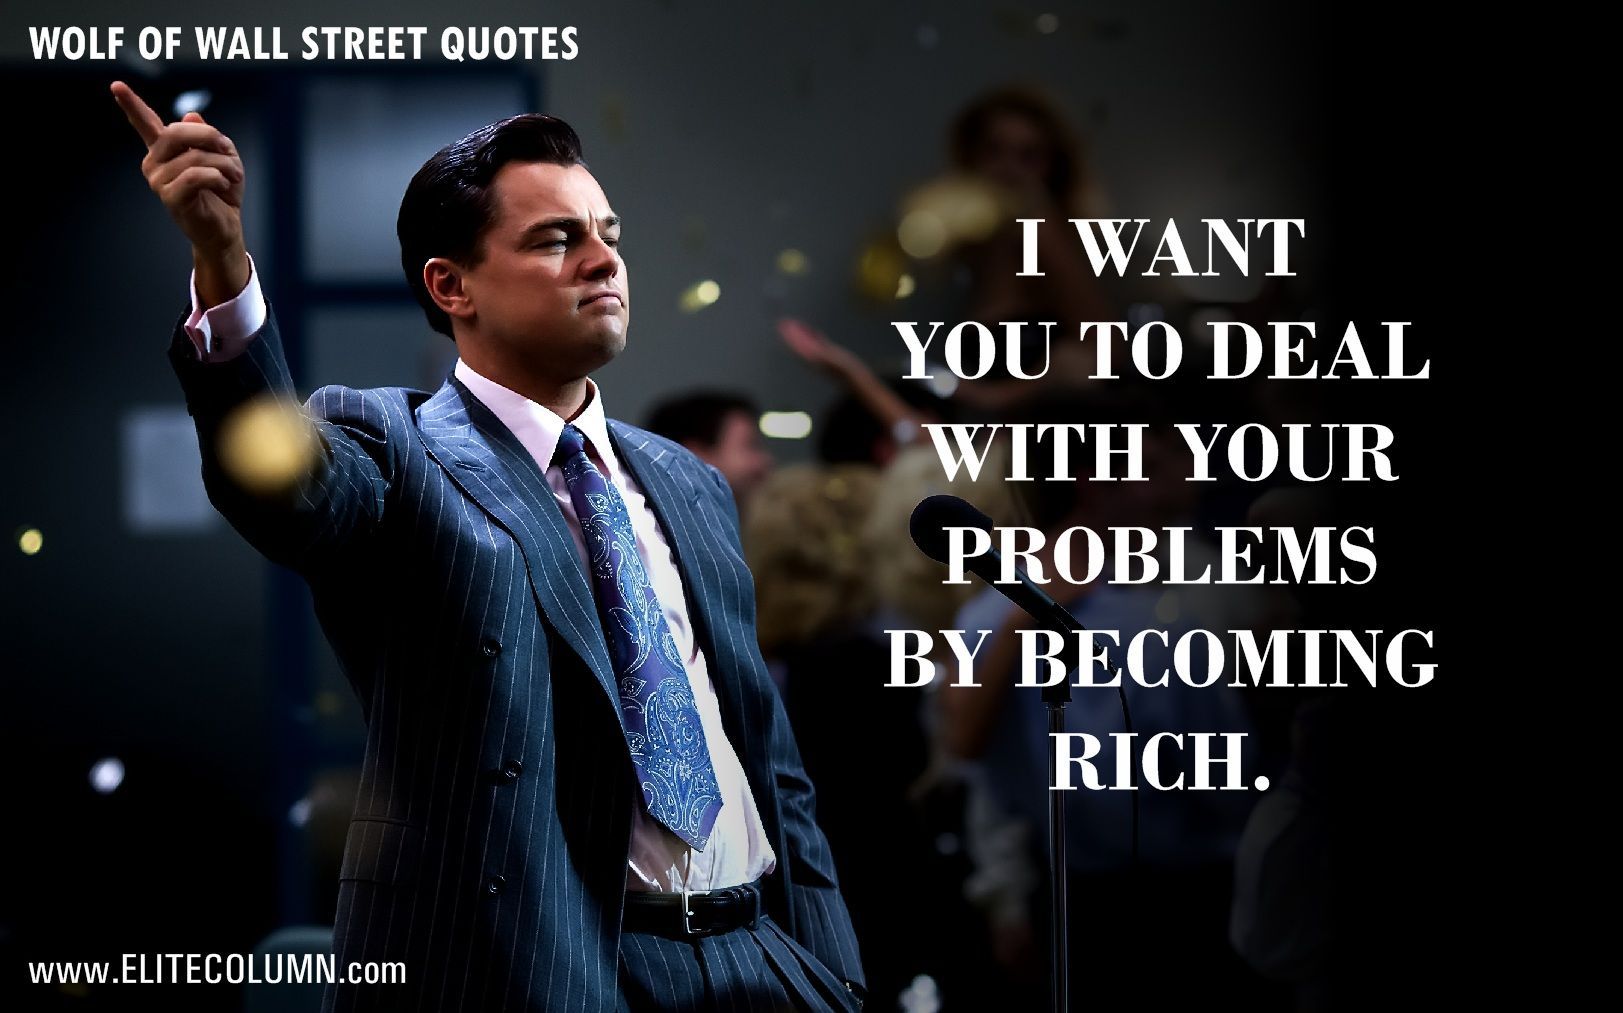 Wolf of Wall Street Quotes Wallpaper Free Wolf of Wall Street Quotes Background